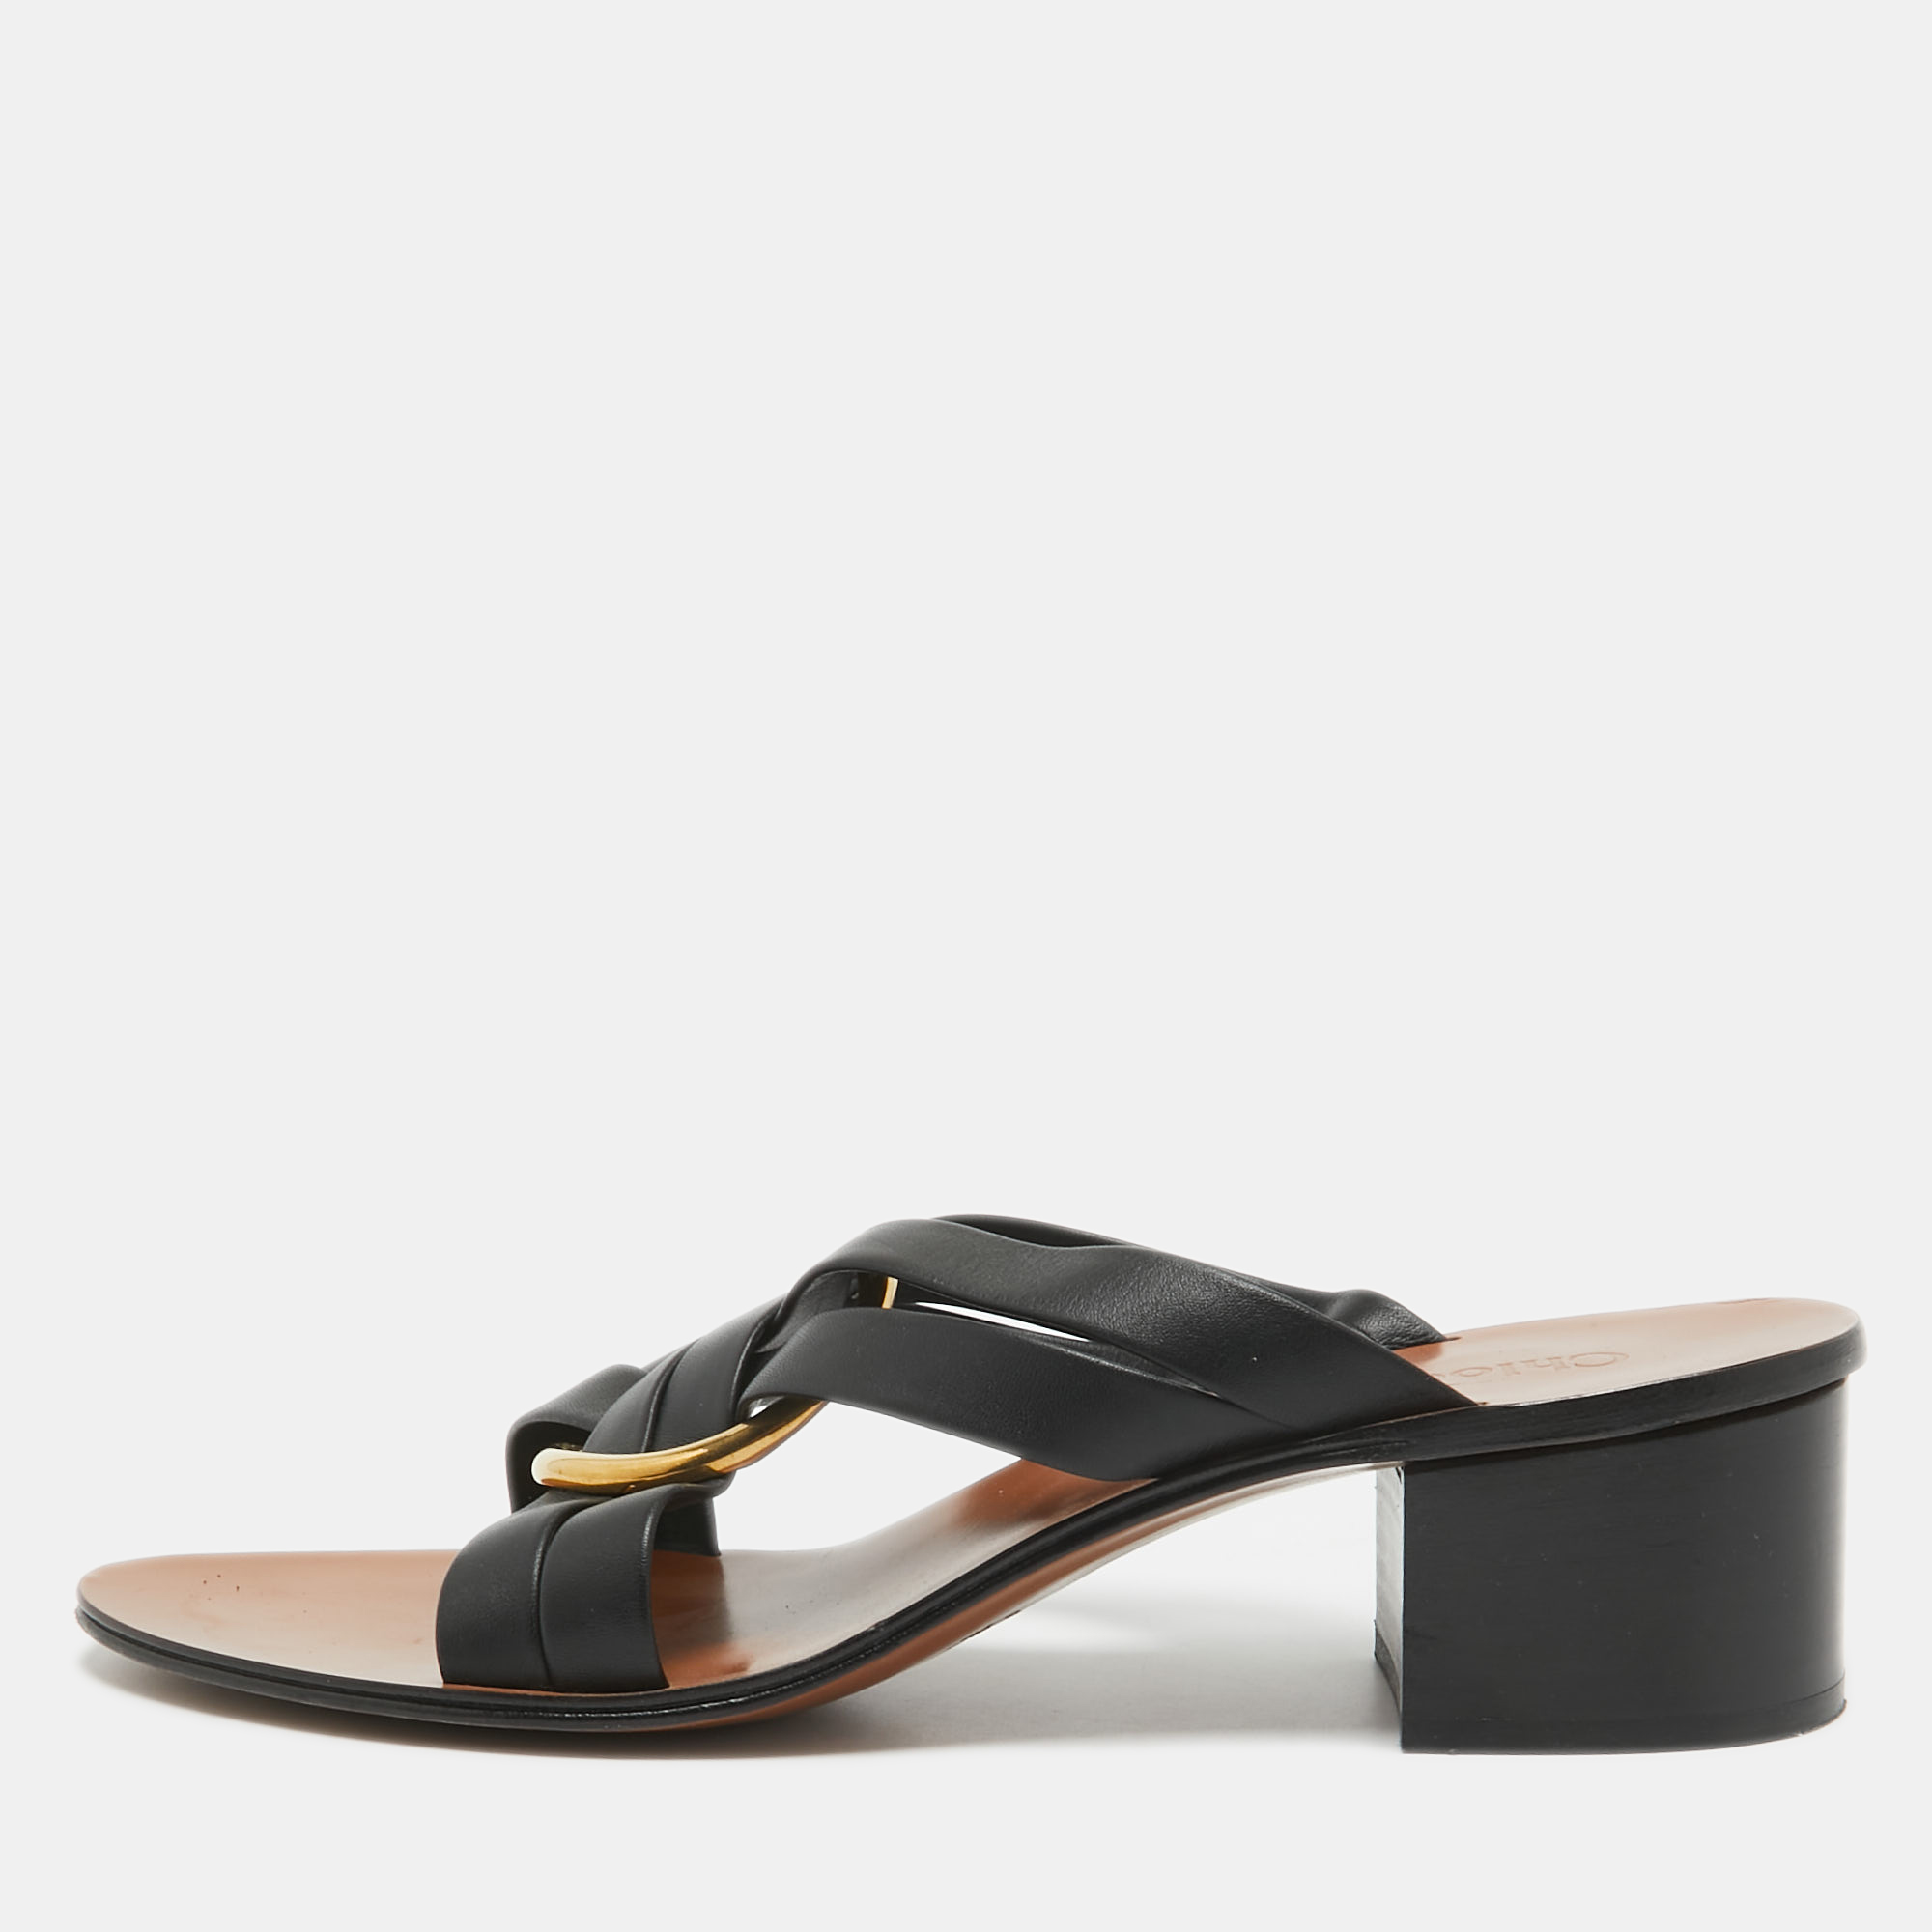 Chlo&eacute; black/brown leather rony slides sandals size 40